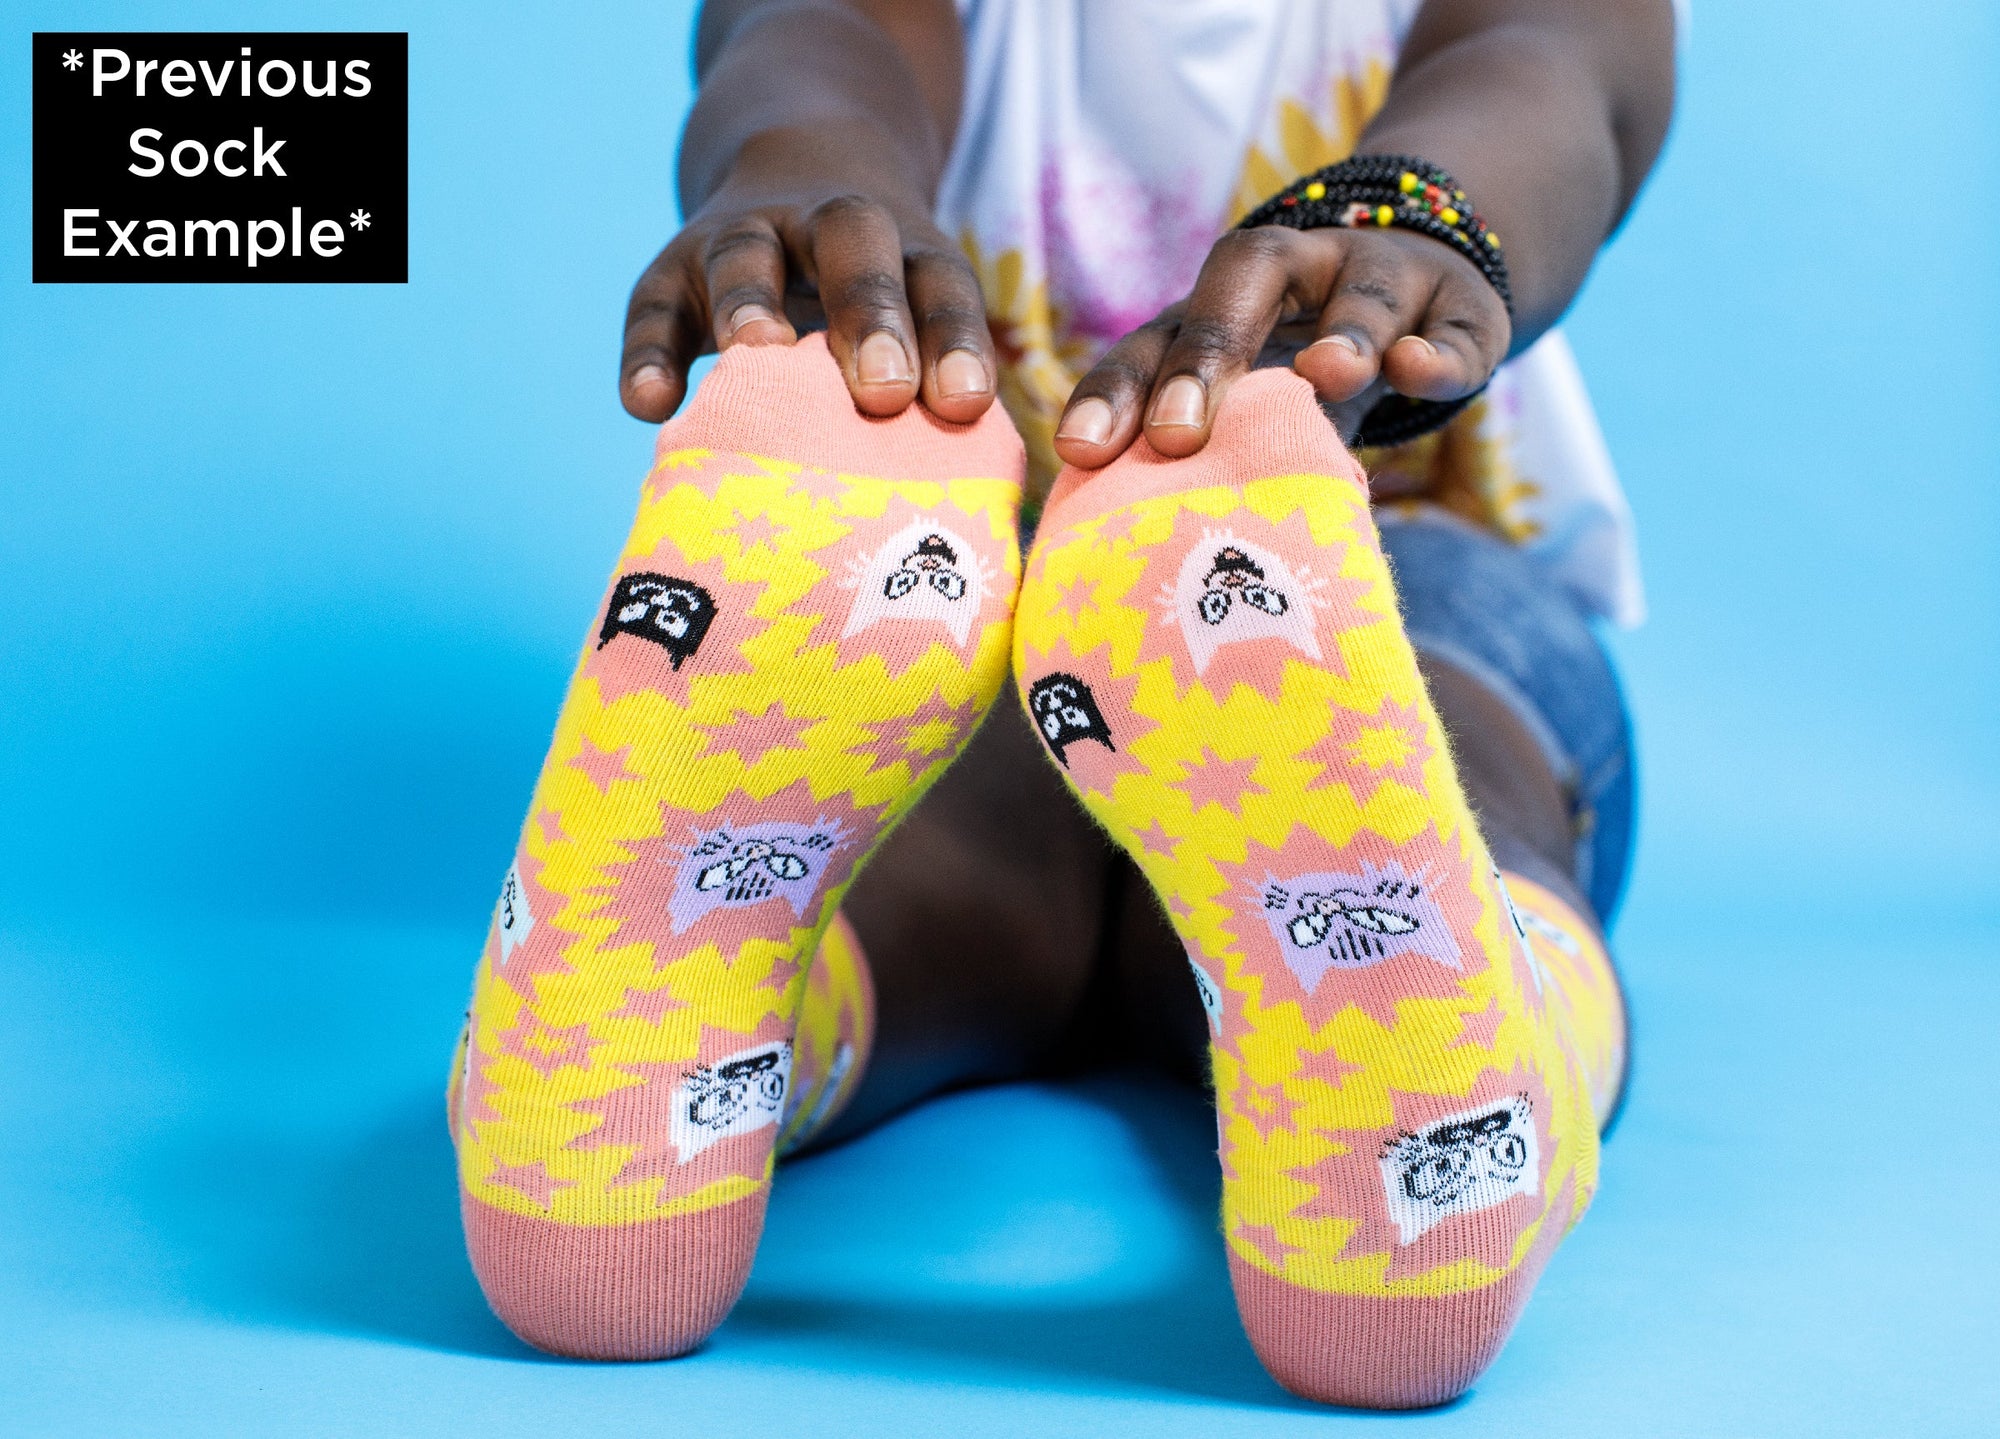 A pair of yellow and pink socks from the Awesome Socks Club with cat heads with different facial expressions. Socks are on the feet of someone sitting down and stretching, holding their feet.